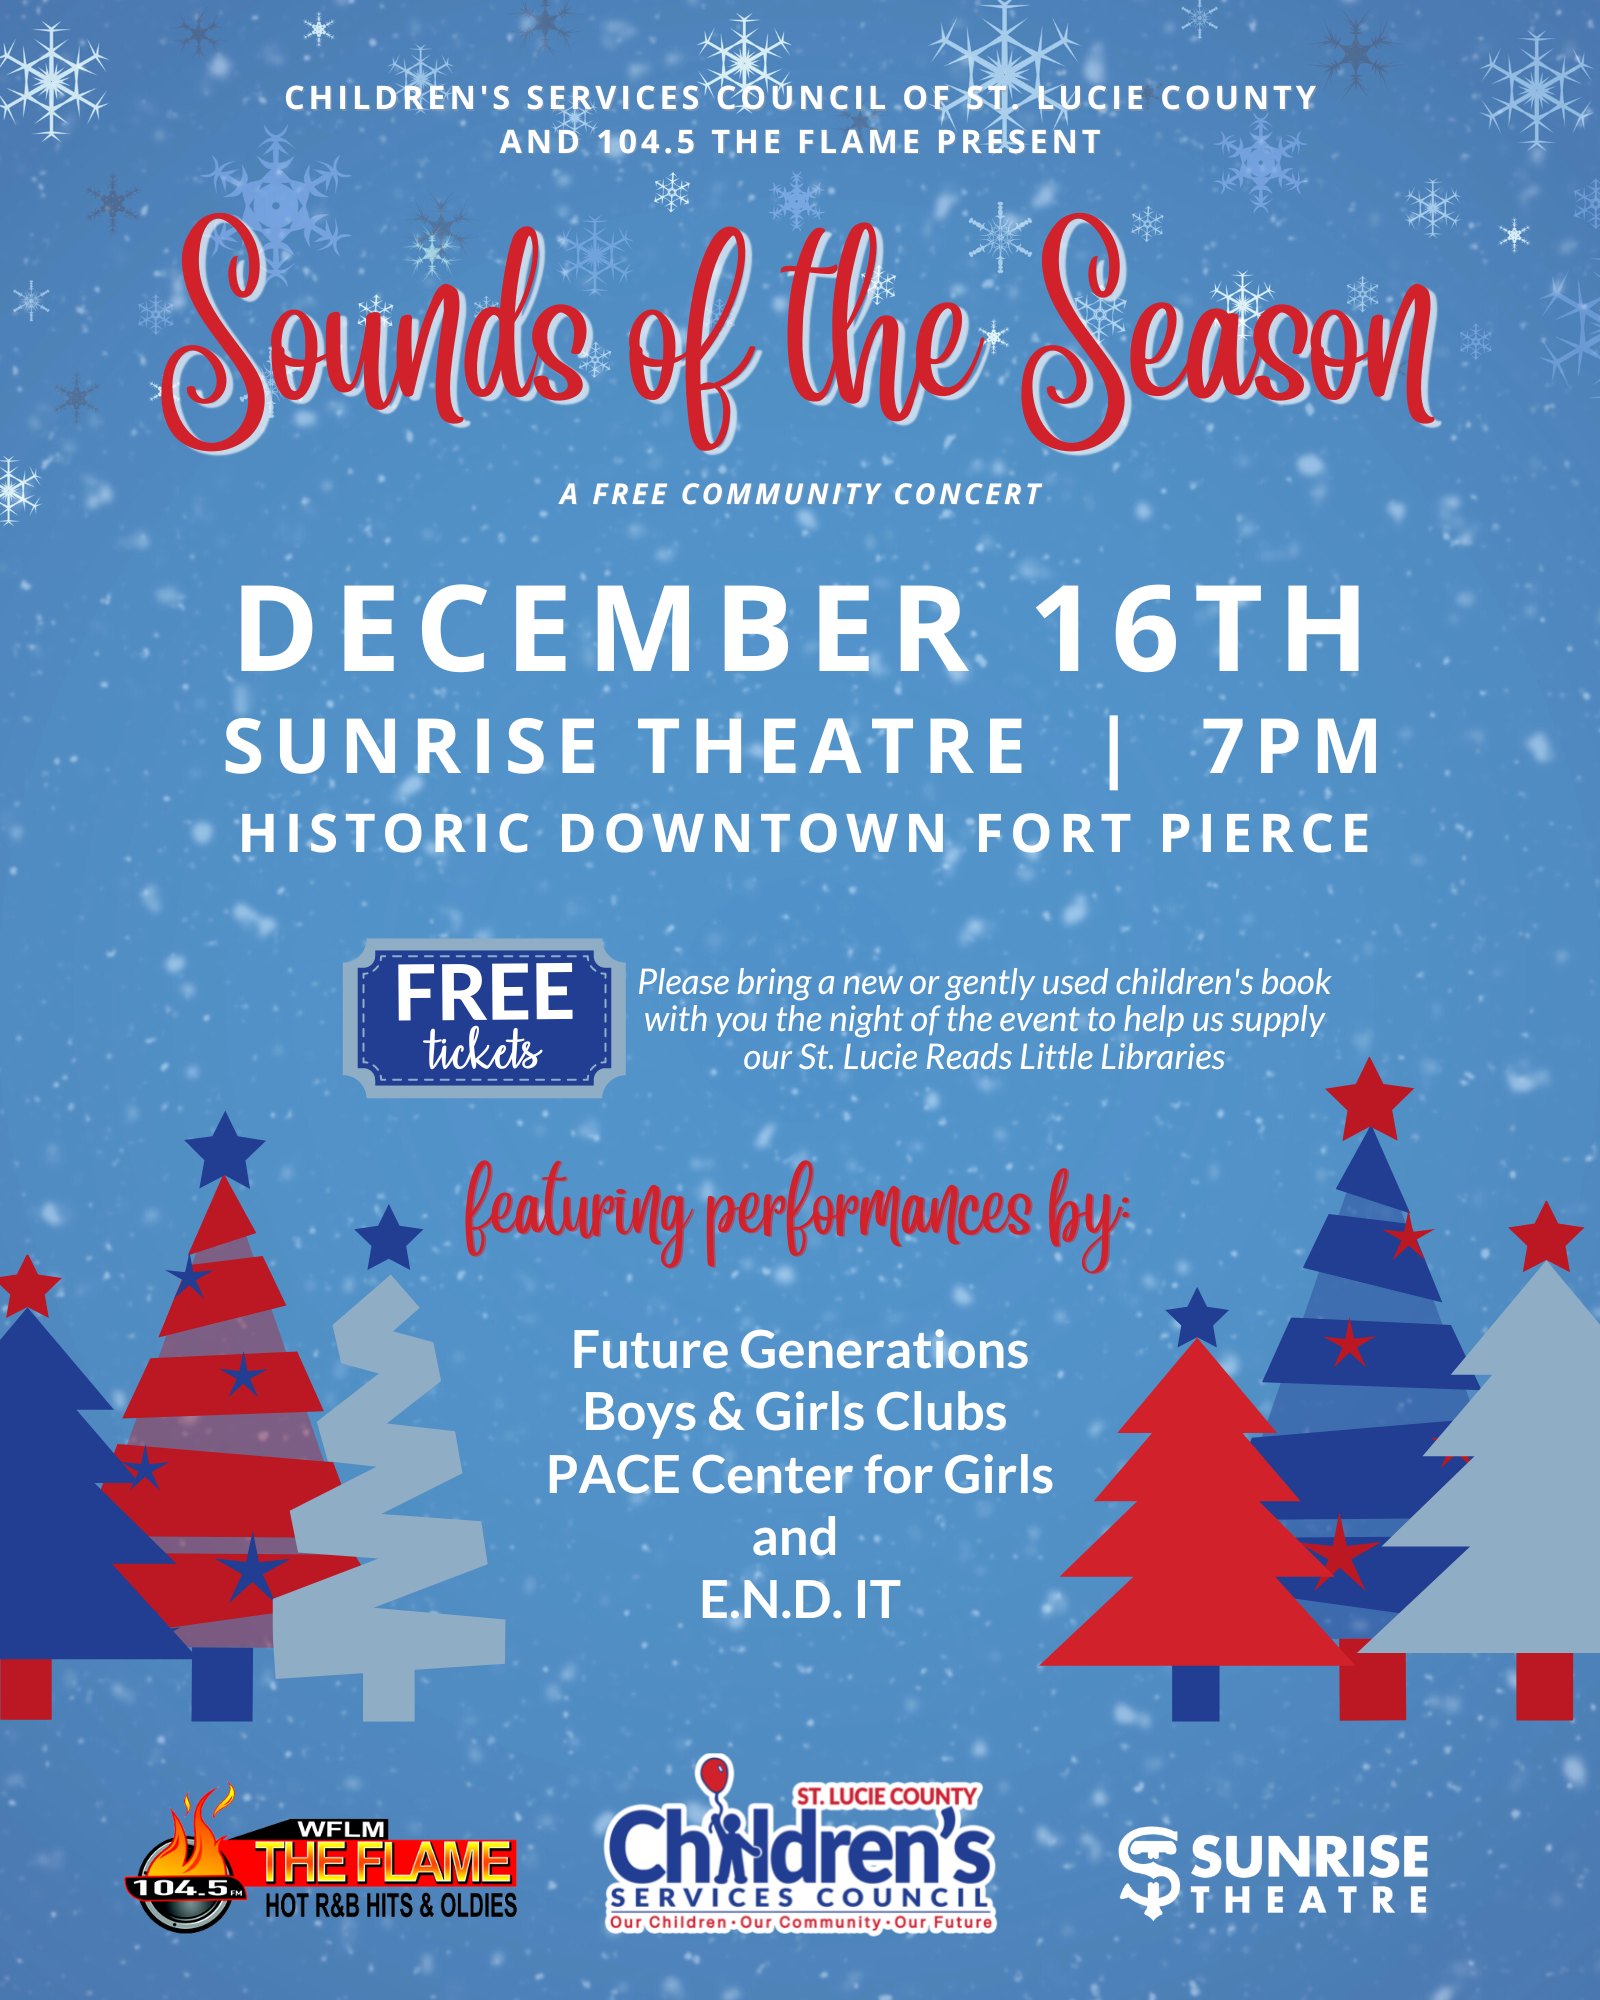 A flyer named Sounds of the Season depicting a free community concert on December 16 7pm at the Sunrise Theatre in Fort Pierce Florida featuring performances by Boys and Girls Clubs PACE Center for Girls and E.N.D. IT